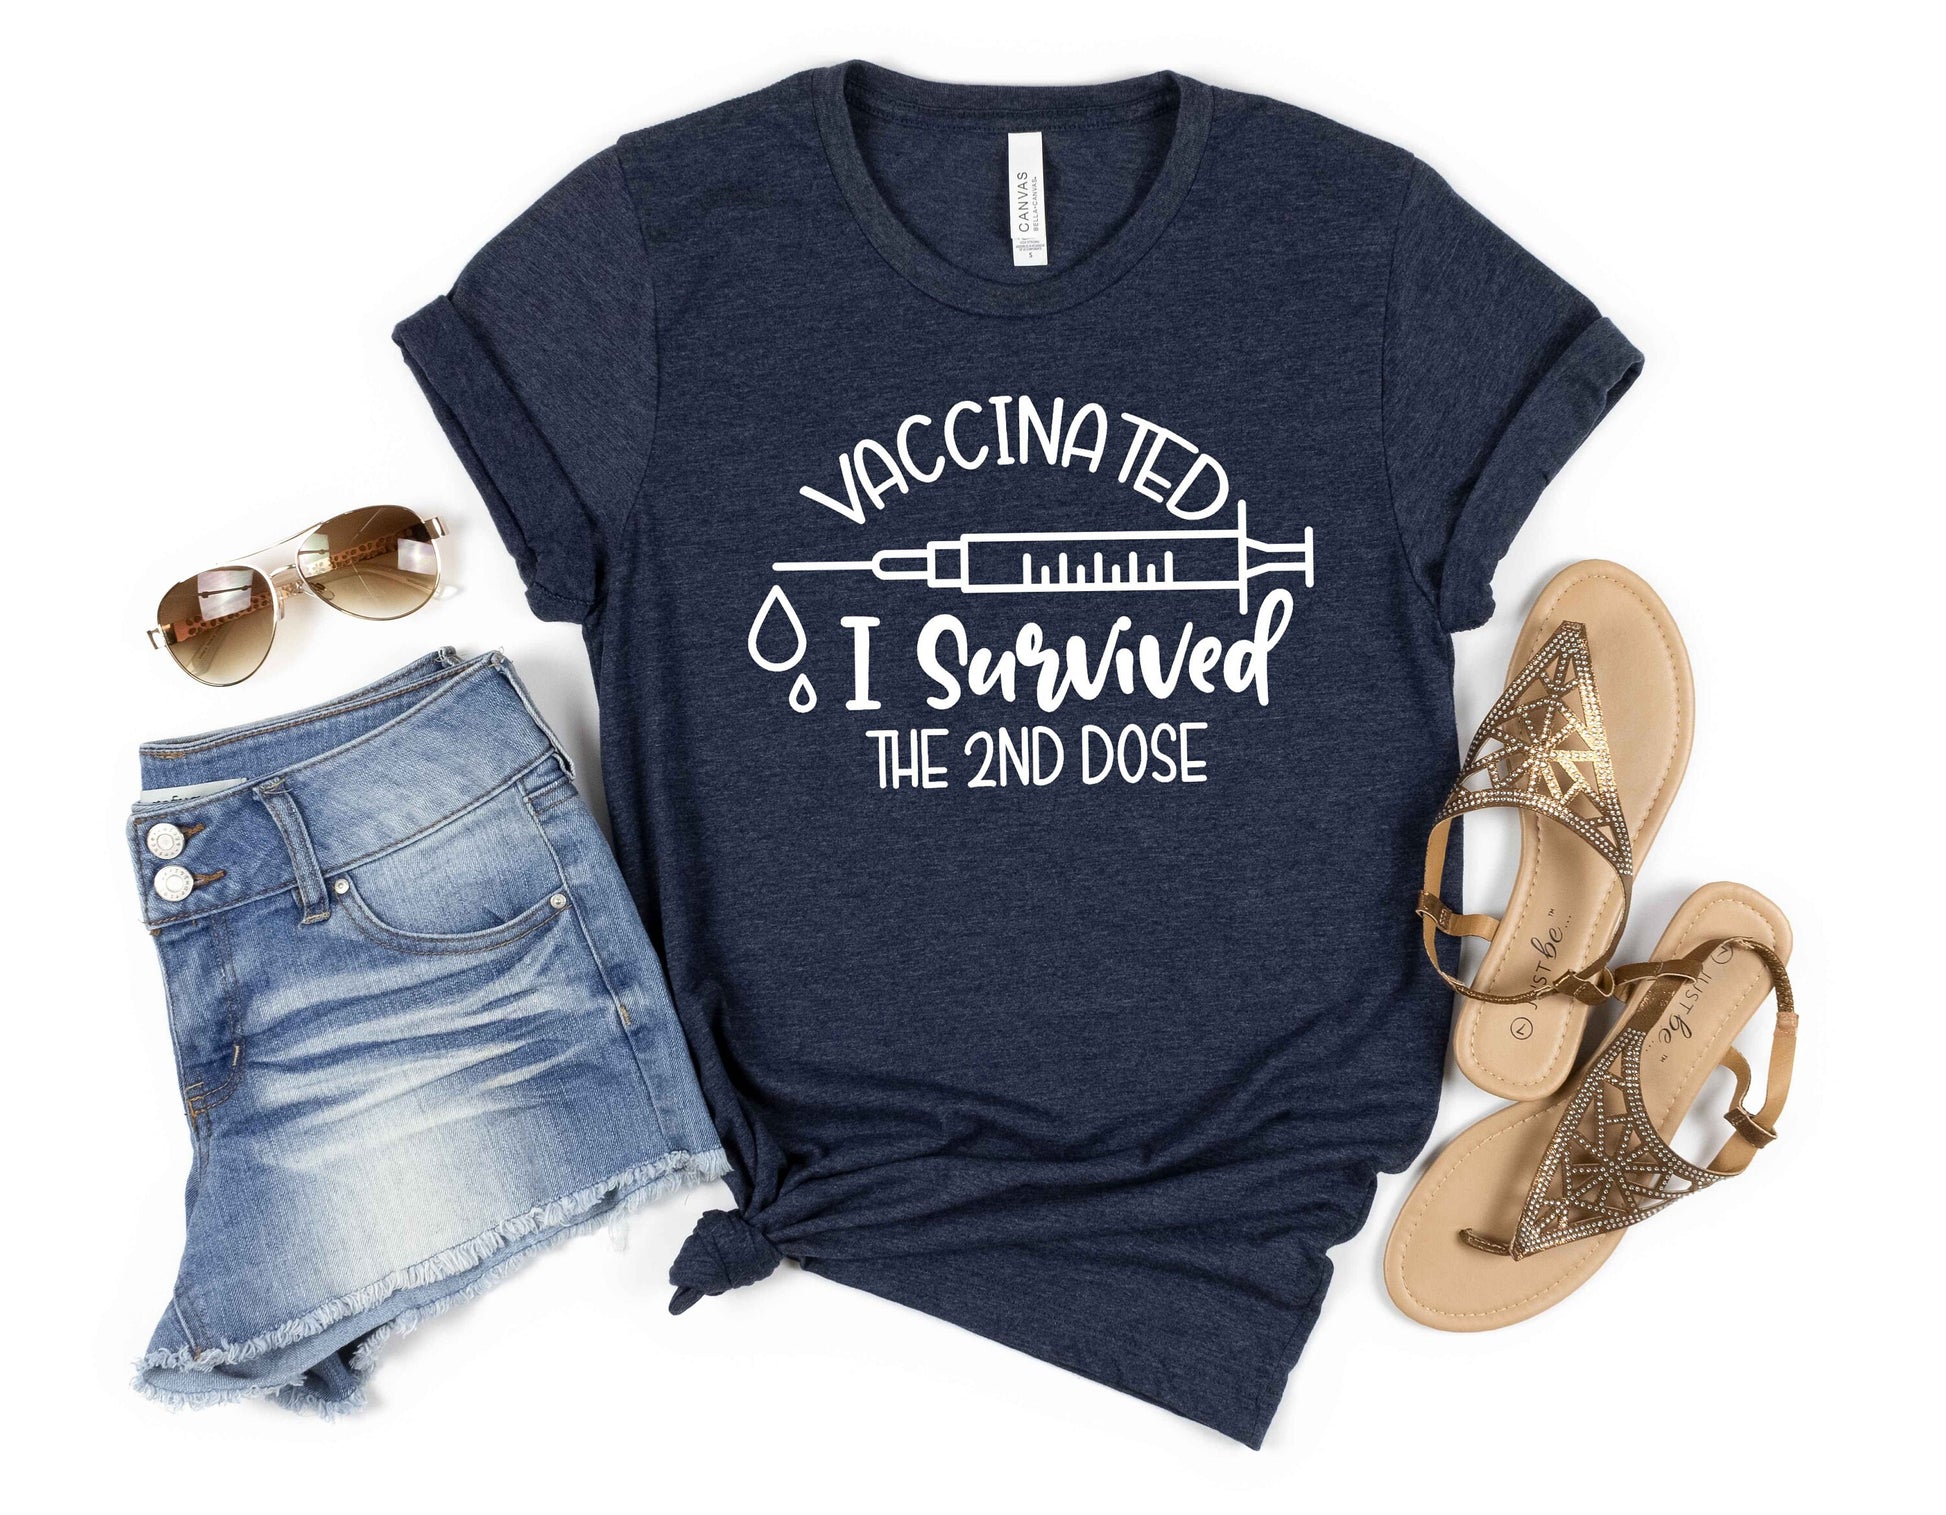 Vaccinated I Survived the 2nd Dose unisex t-shirt • super soft tees for women • vaccinated shirt • proudly vaccinated